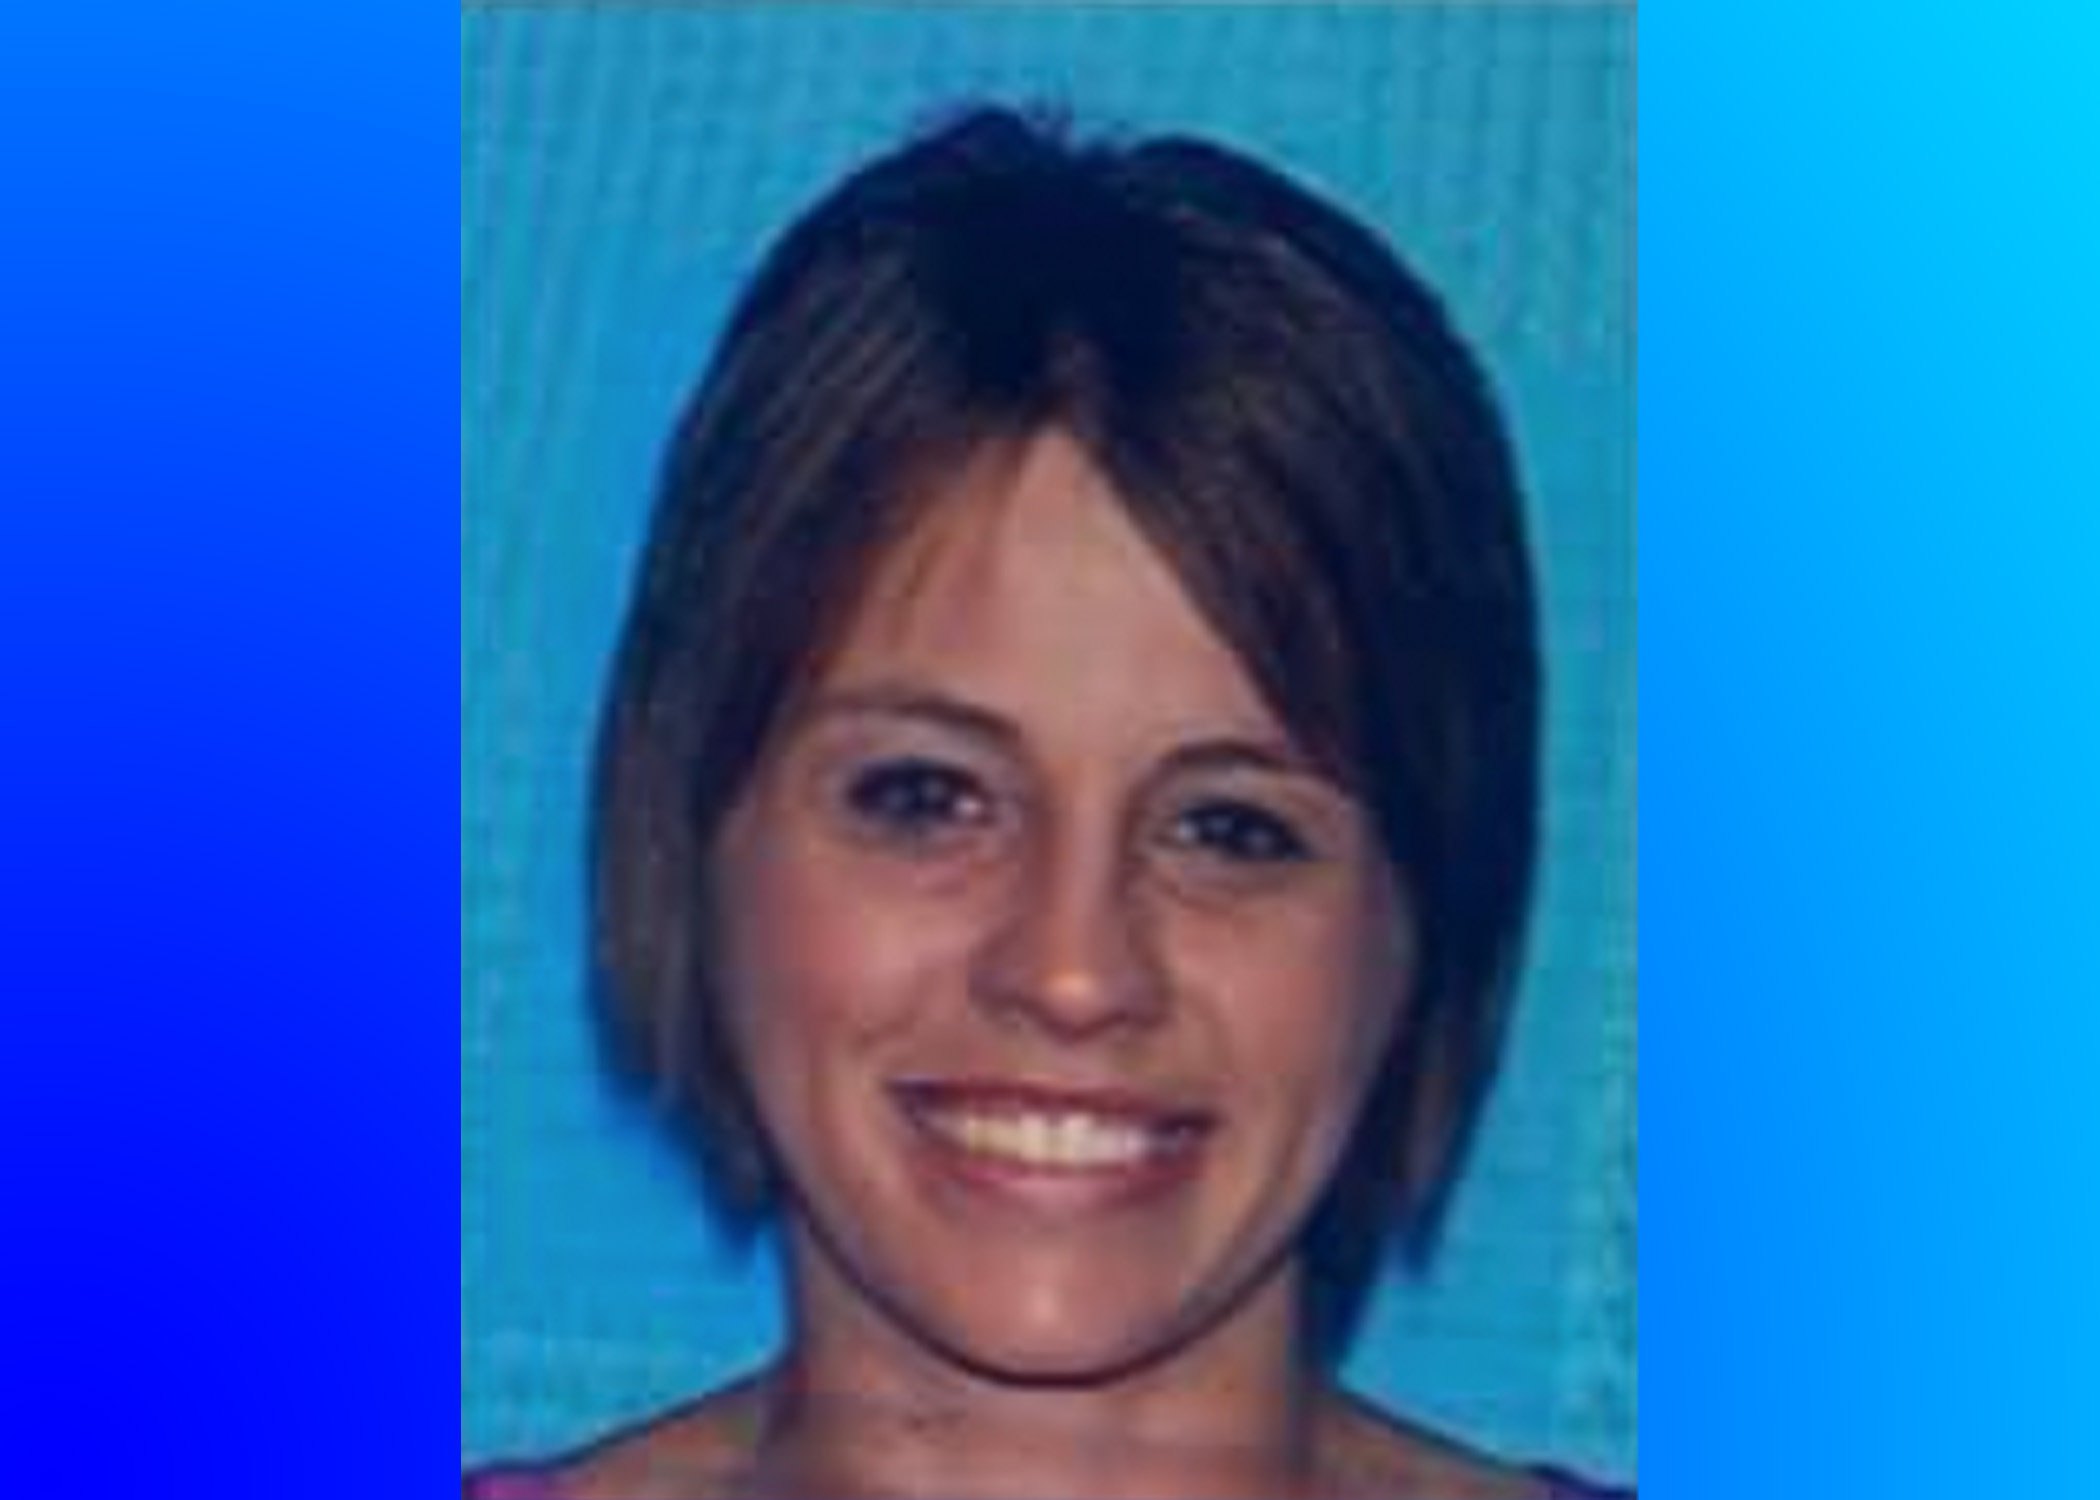 St. Clair County Sheriff's Office issues missing person alert for 32-year-old woman